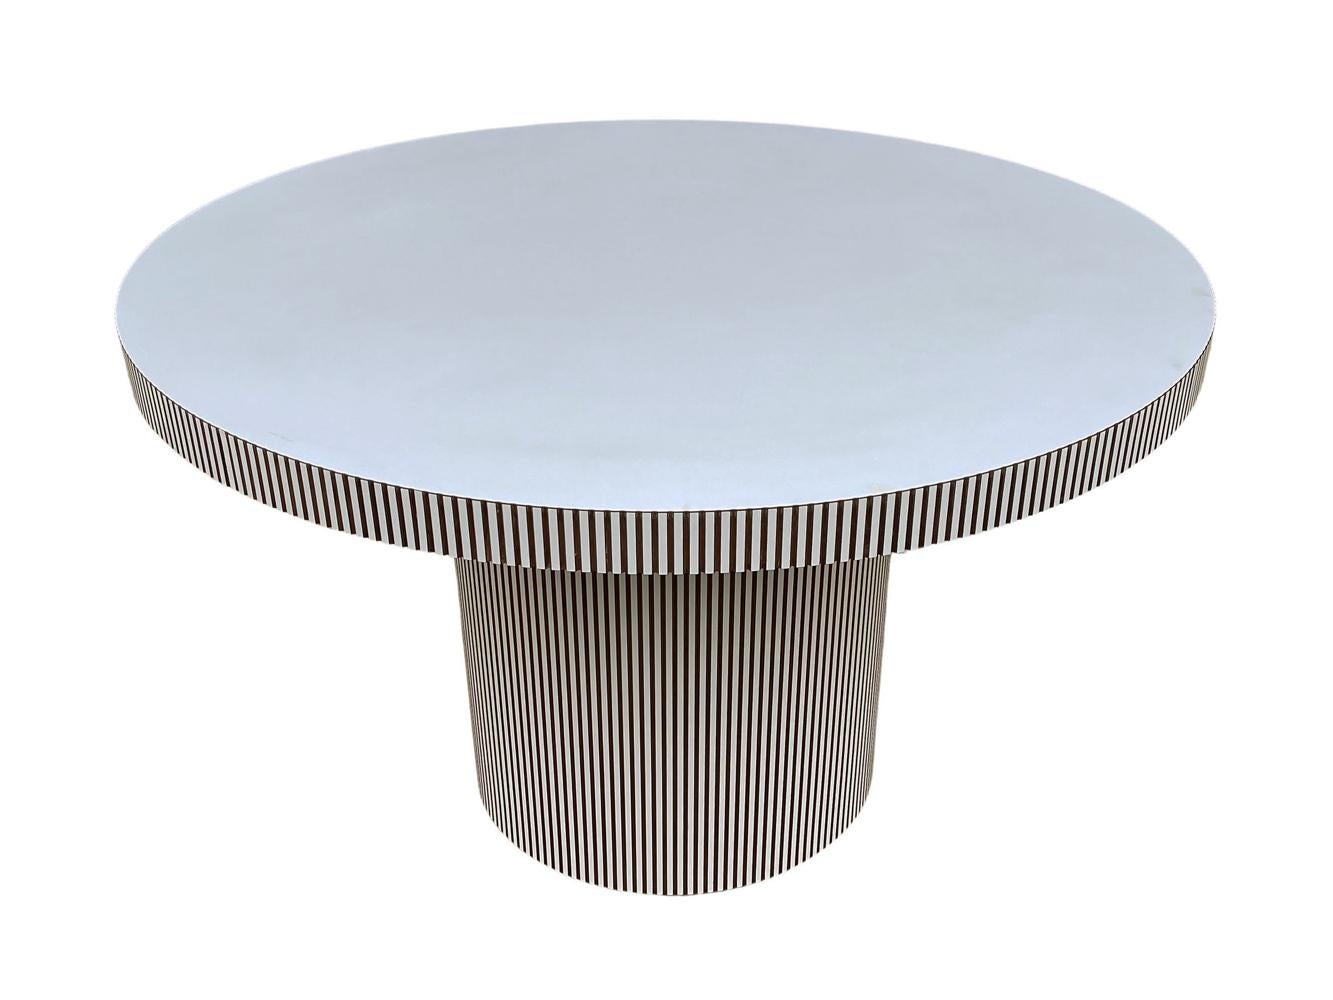 Post-Modern Mid Century Post Modern Round or Circular Dining Table in White with Relief Side For Sale